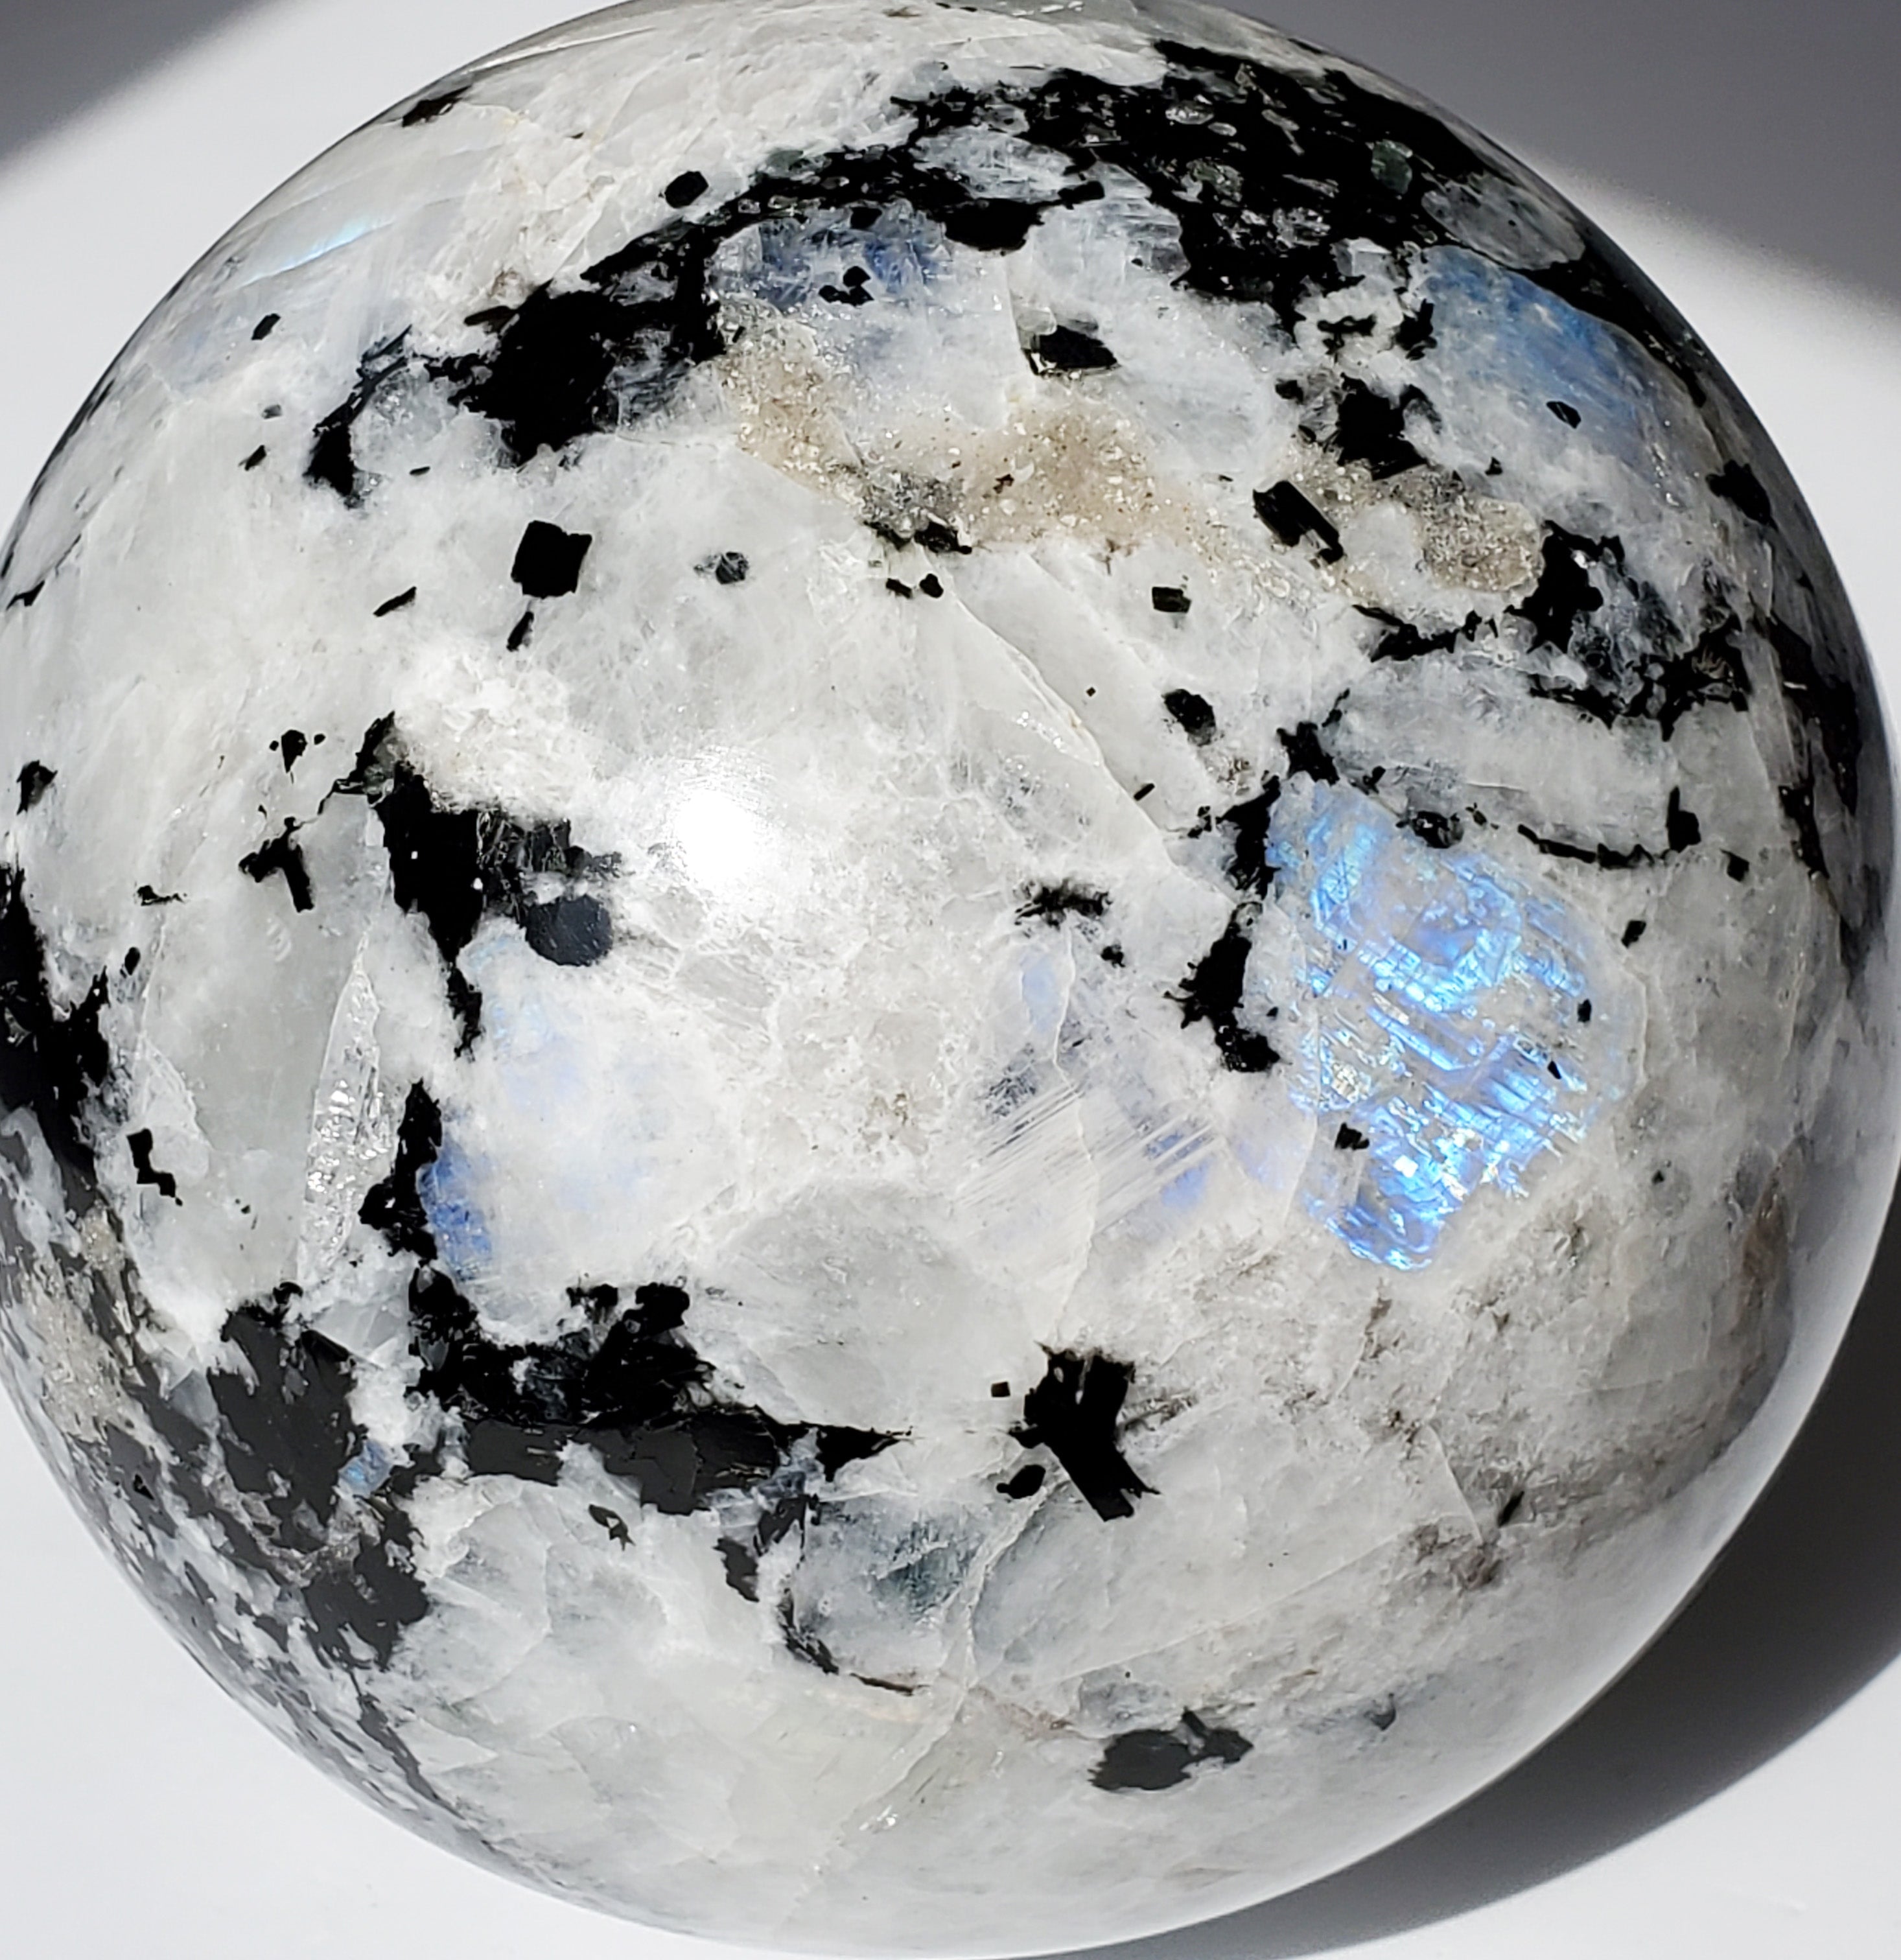 Moonstone Sphere Extra Large with rainbow inclusions